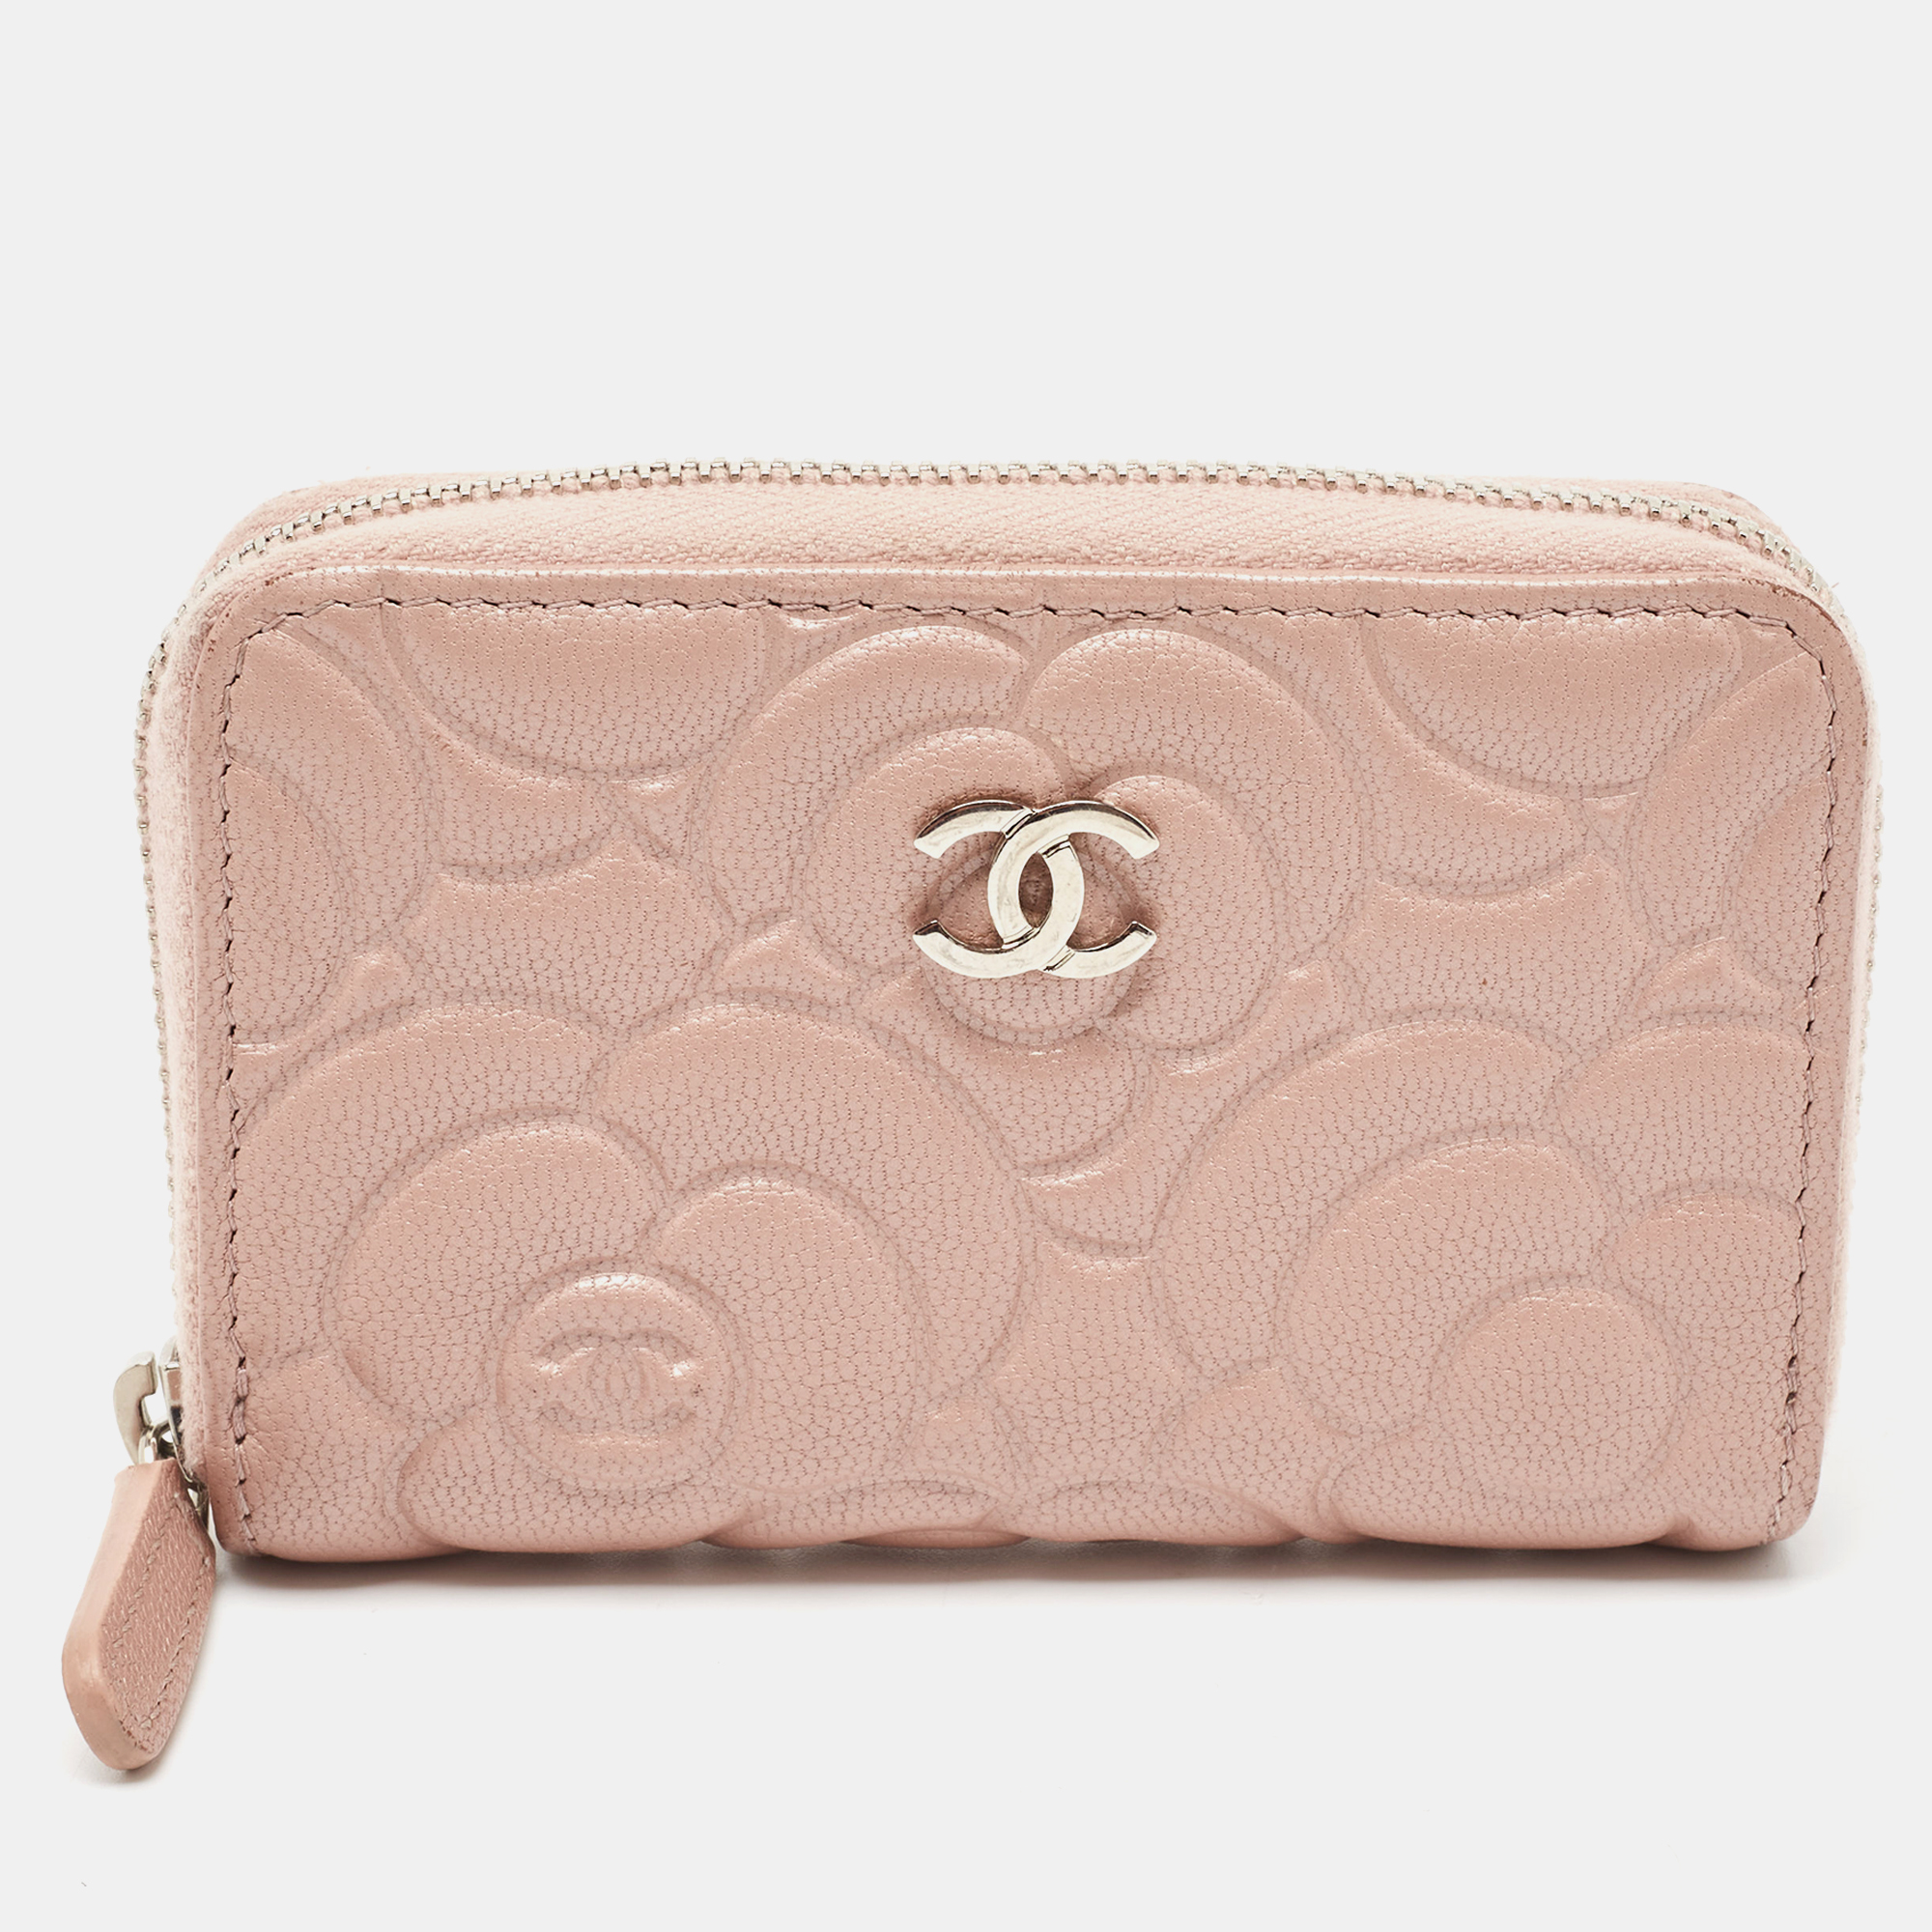 Chanel pink camellia embossed leather zip around coin purse